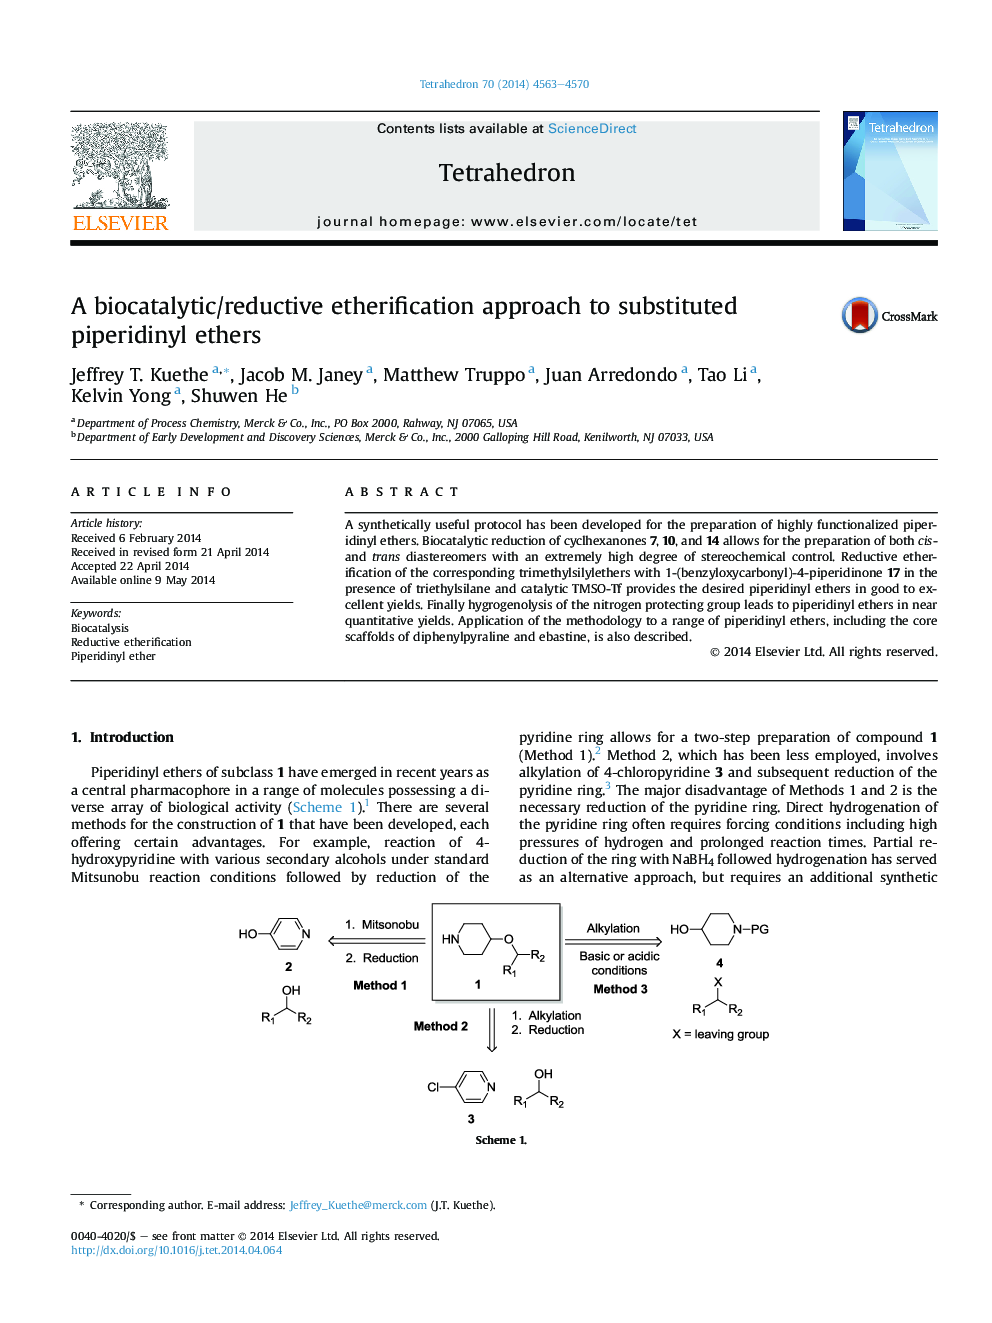 A biocatalytic/reductive etherification approach to substituted piperidinyl ethers